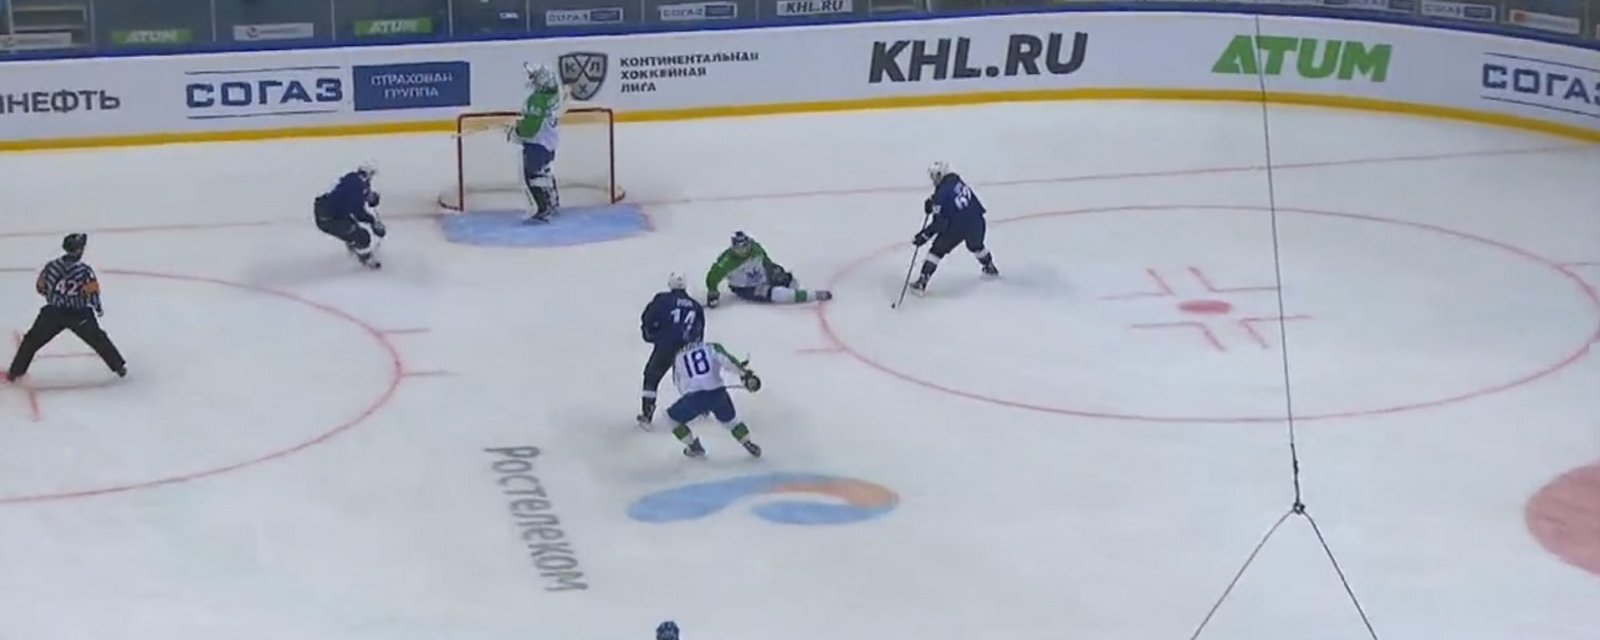 Goalie takes a drink of water in the middle of a three on one against him.